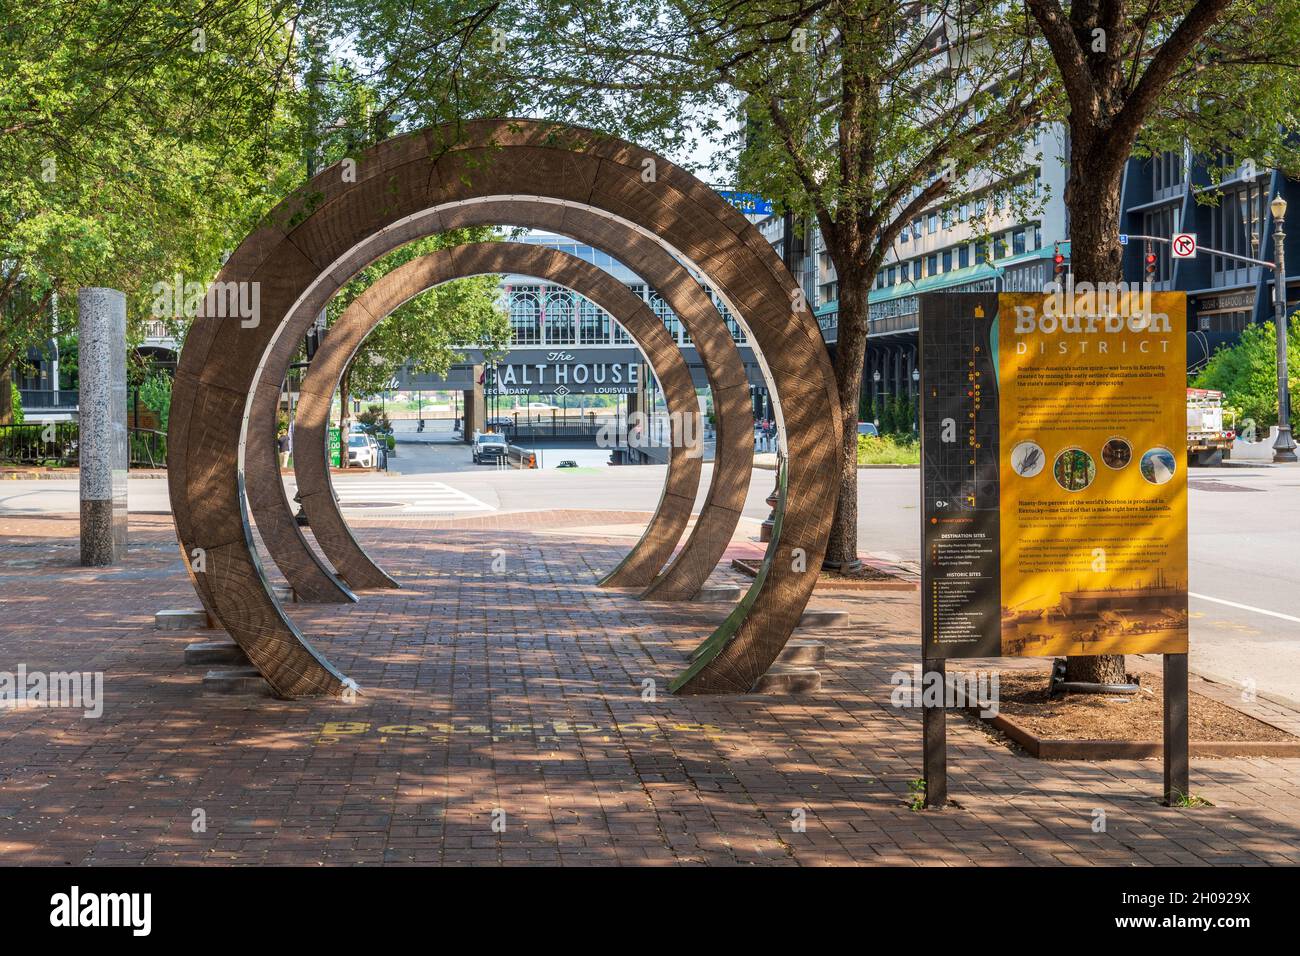 Louisville, KY - Sept. 11, 2021: 'The Barrel' along with an interpretive sign designates Fourth and Main Streets as the center of the Bourbon District Stock Photo